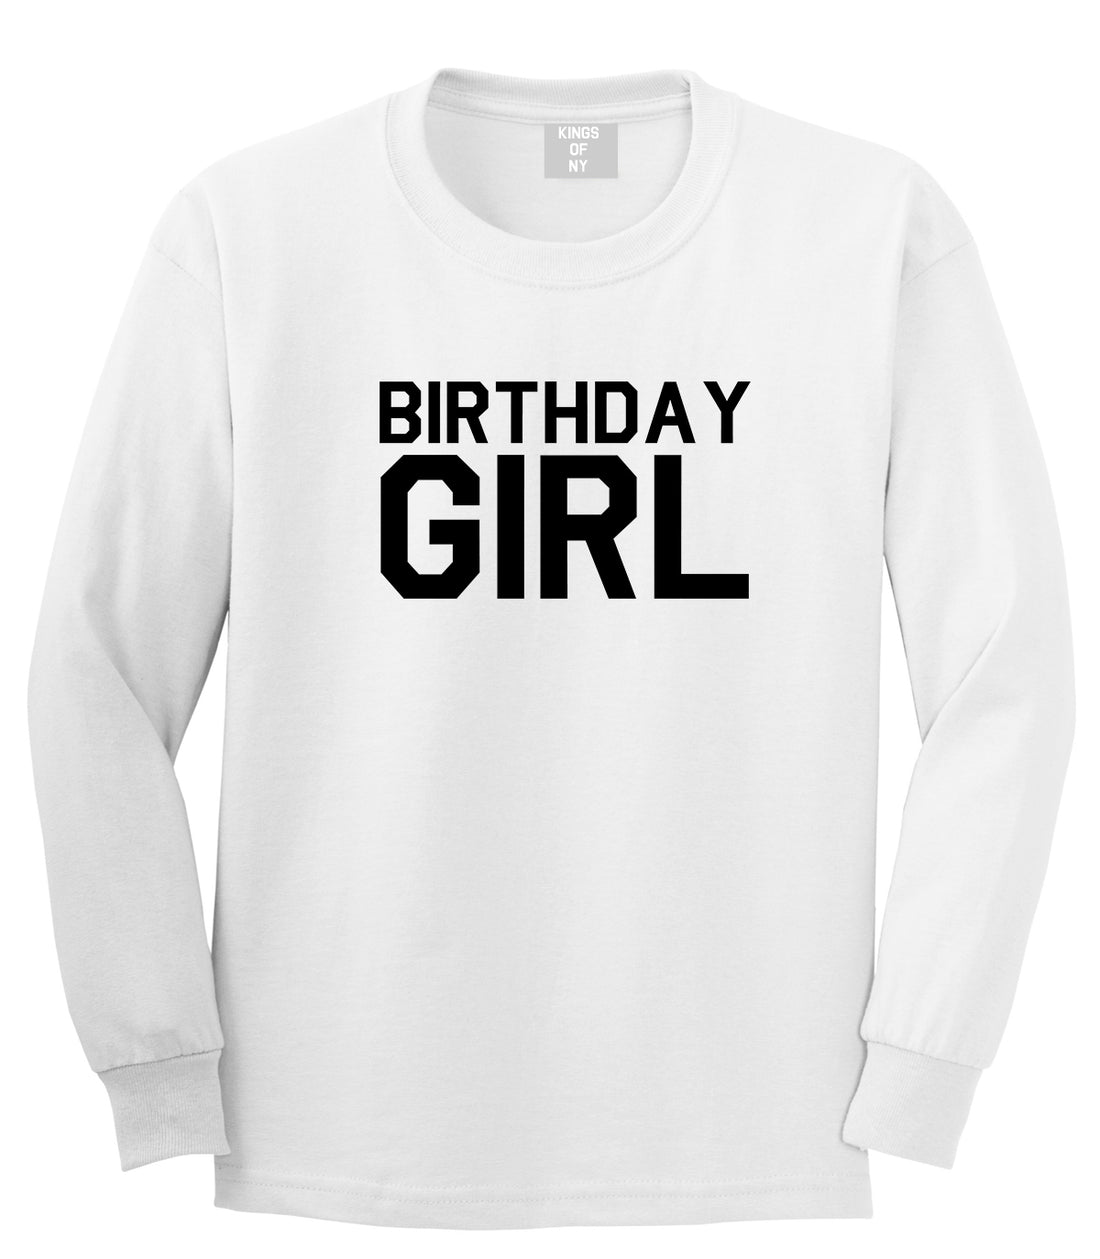 Birthday Girl White Long Sleeve T-Shirt by Kings Of NY